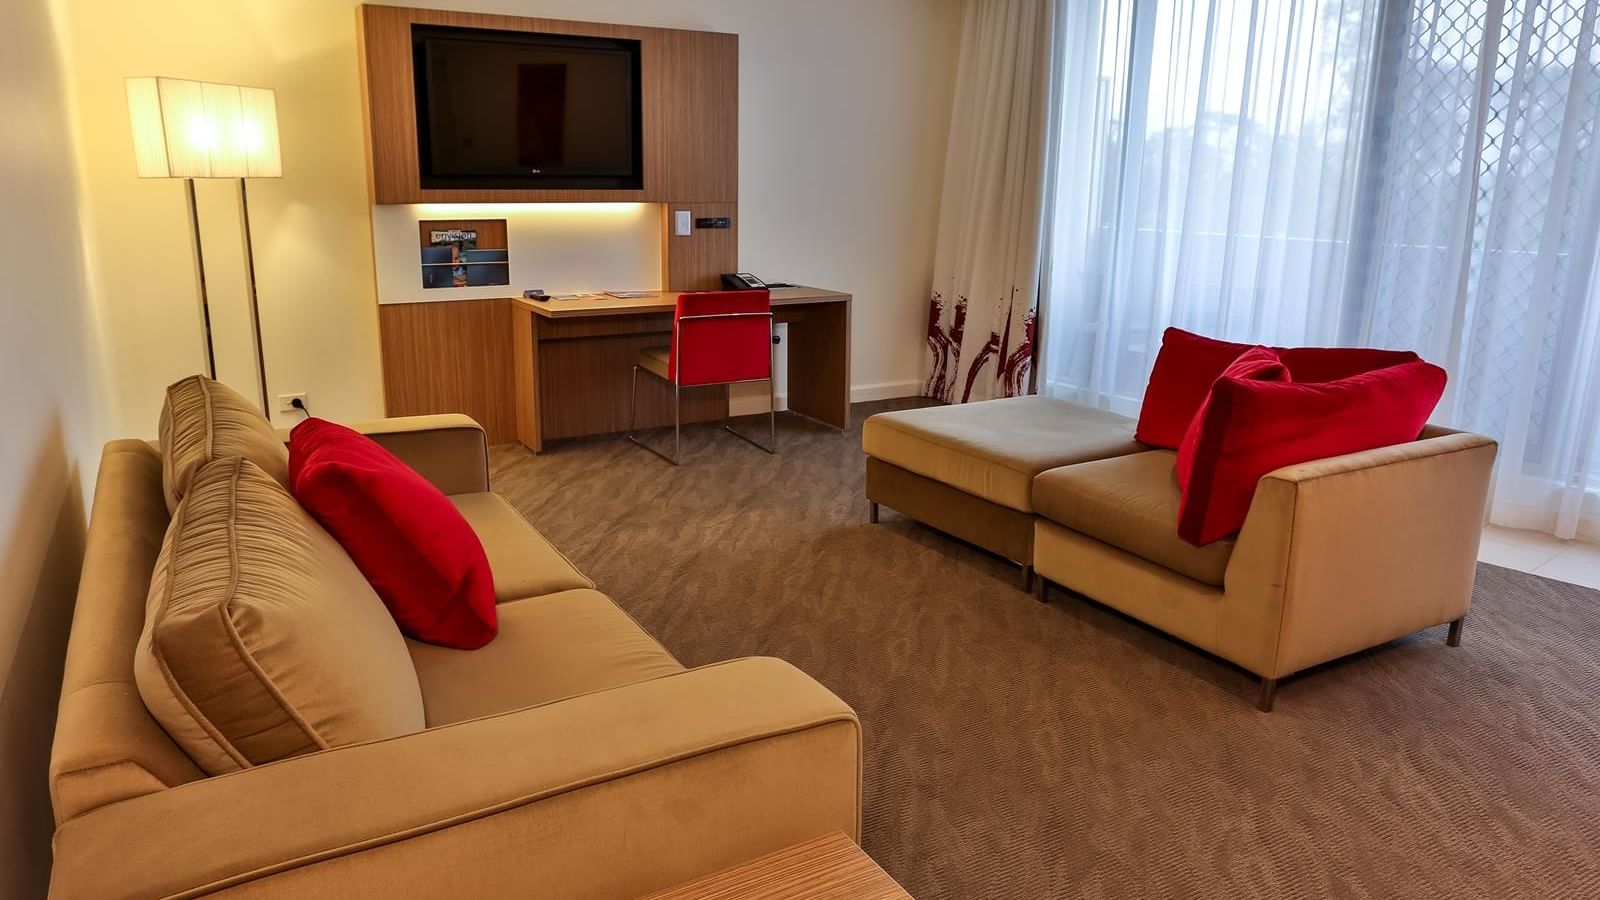 Living area of 1 Bedroom Apartment with sofas at Novotel Sydney